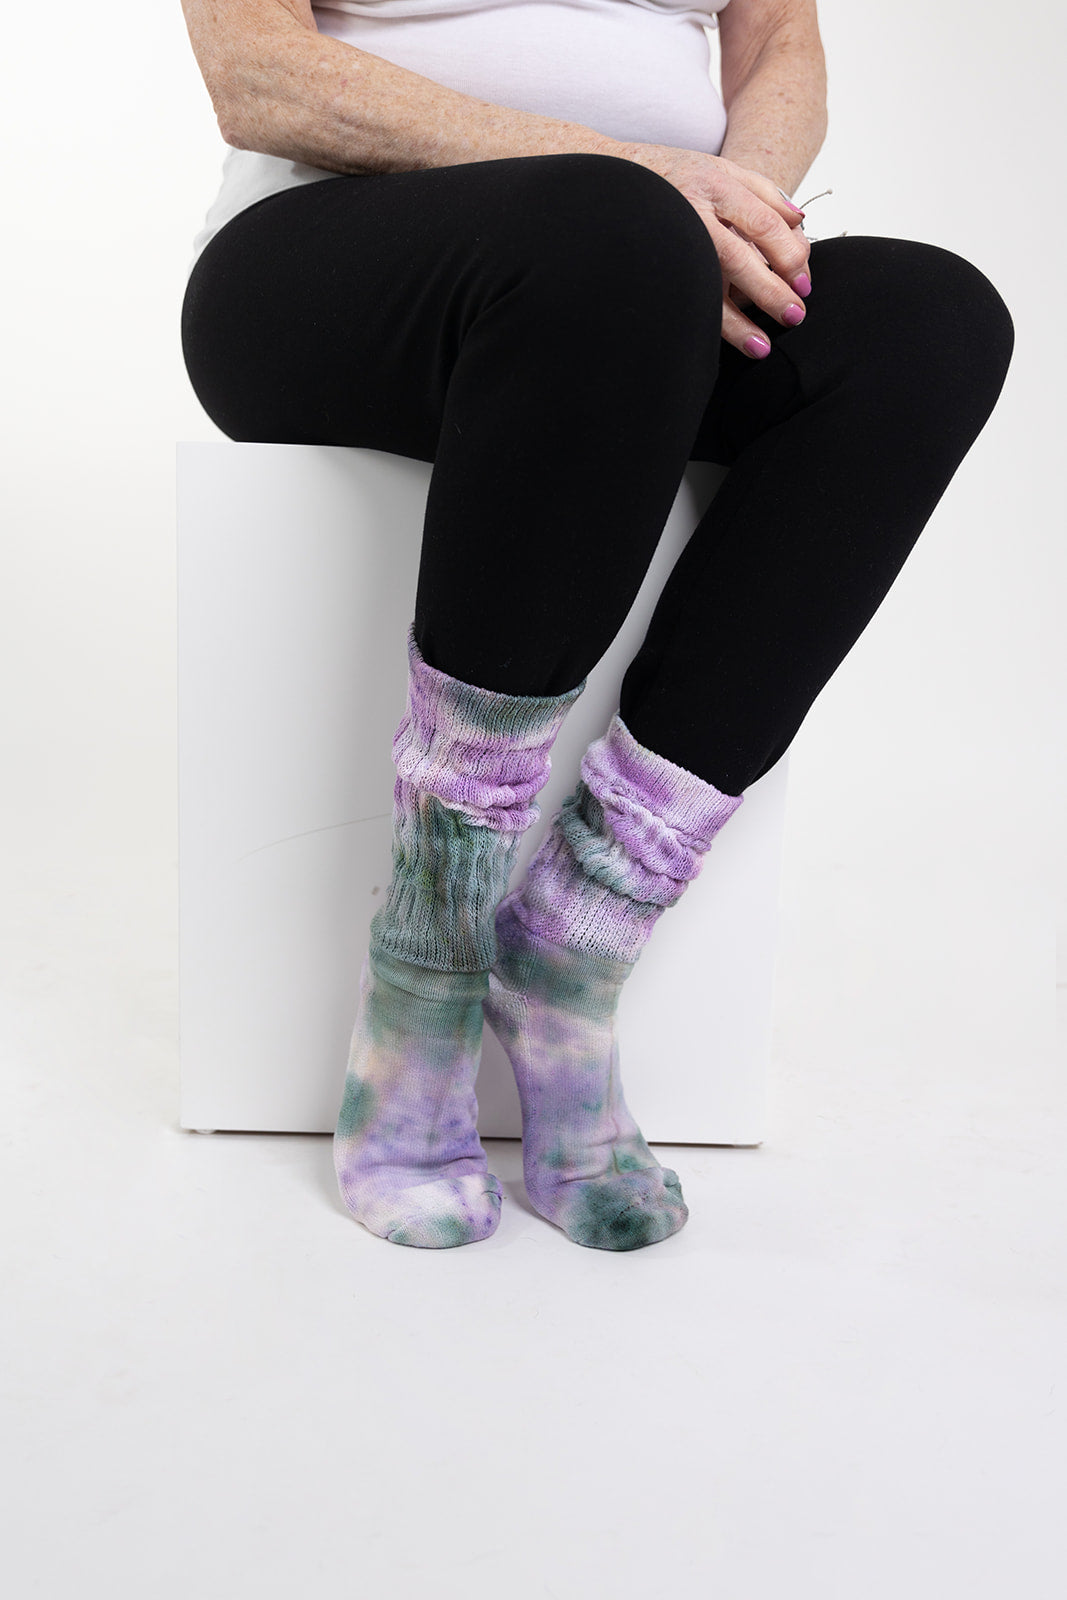 Adult Tie-Dye Slouch Socks – To Tie-Dye for Clothing